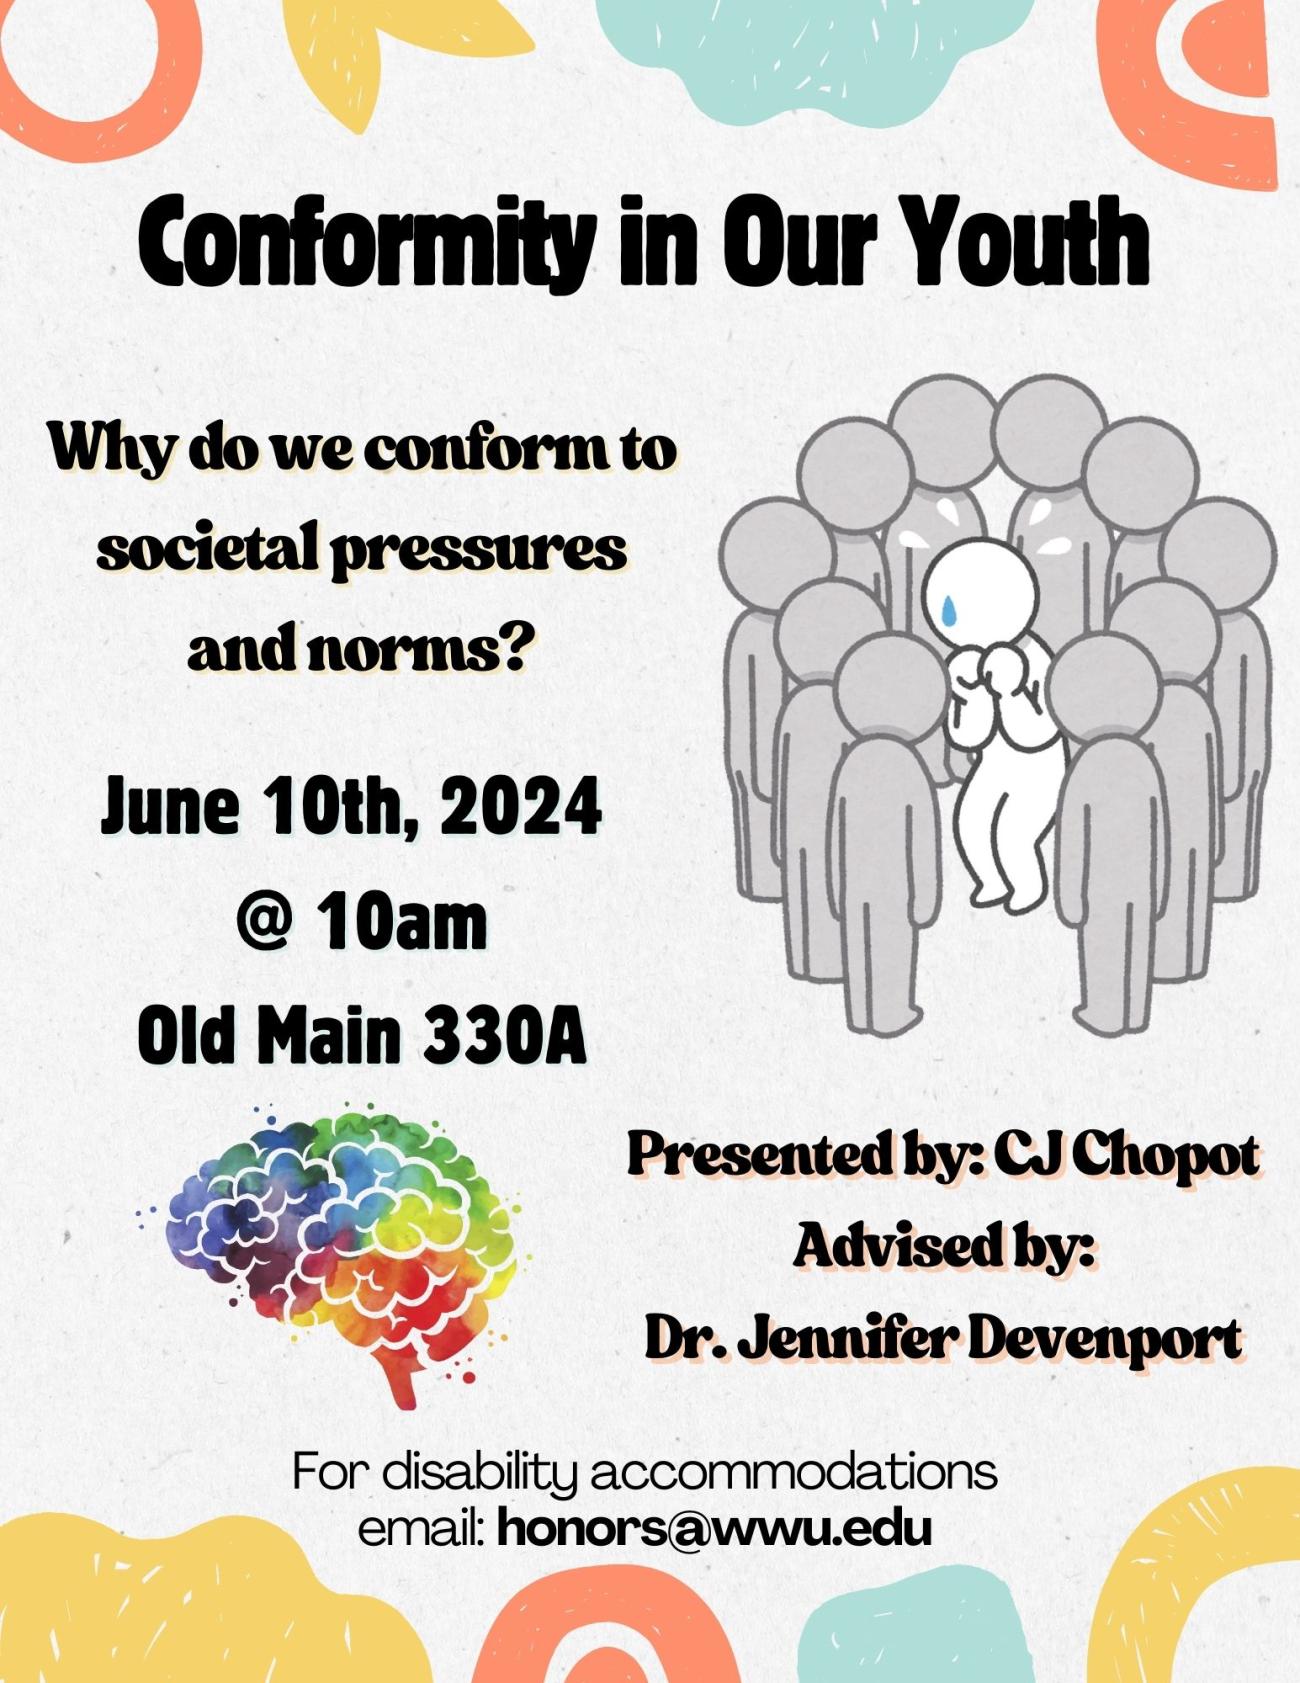 White background containing two images. The first image being a group of people standing around an individual in a circle making them uncomfortable. The second being a rainbow-colored brain and brain stem. Text reads “Conformity in our Youth. Why do we conform to societal pressures and norms? Presented by: CJ Chopot, Advised by: Dr. Jennifer Devenport. June 10th, 2024, at 10am in Old Main 330A. For disability accommodations email: honors@wwu.edu”.